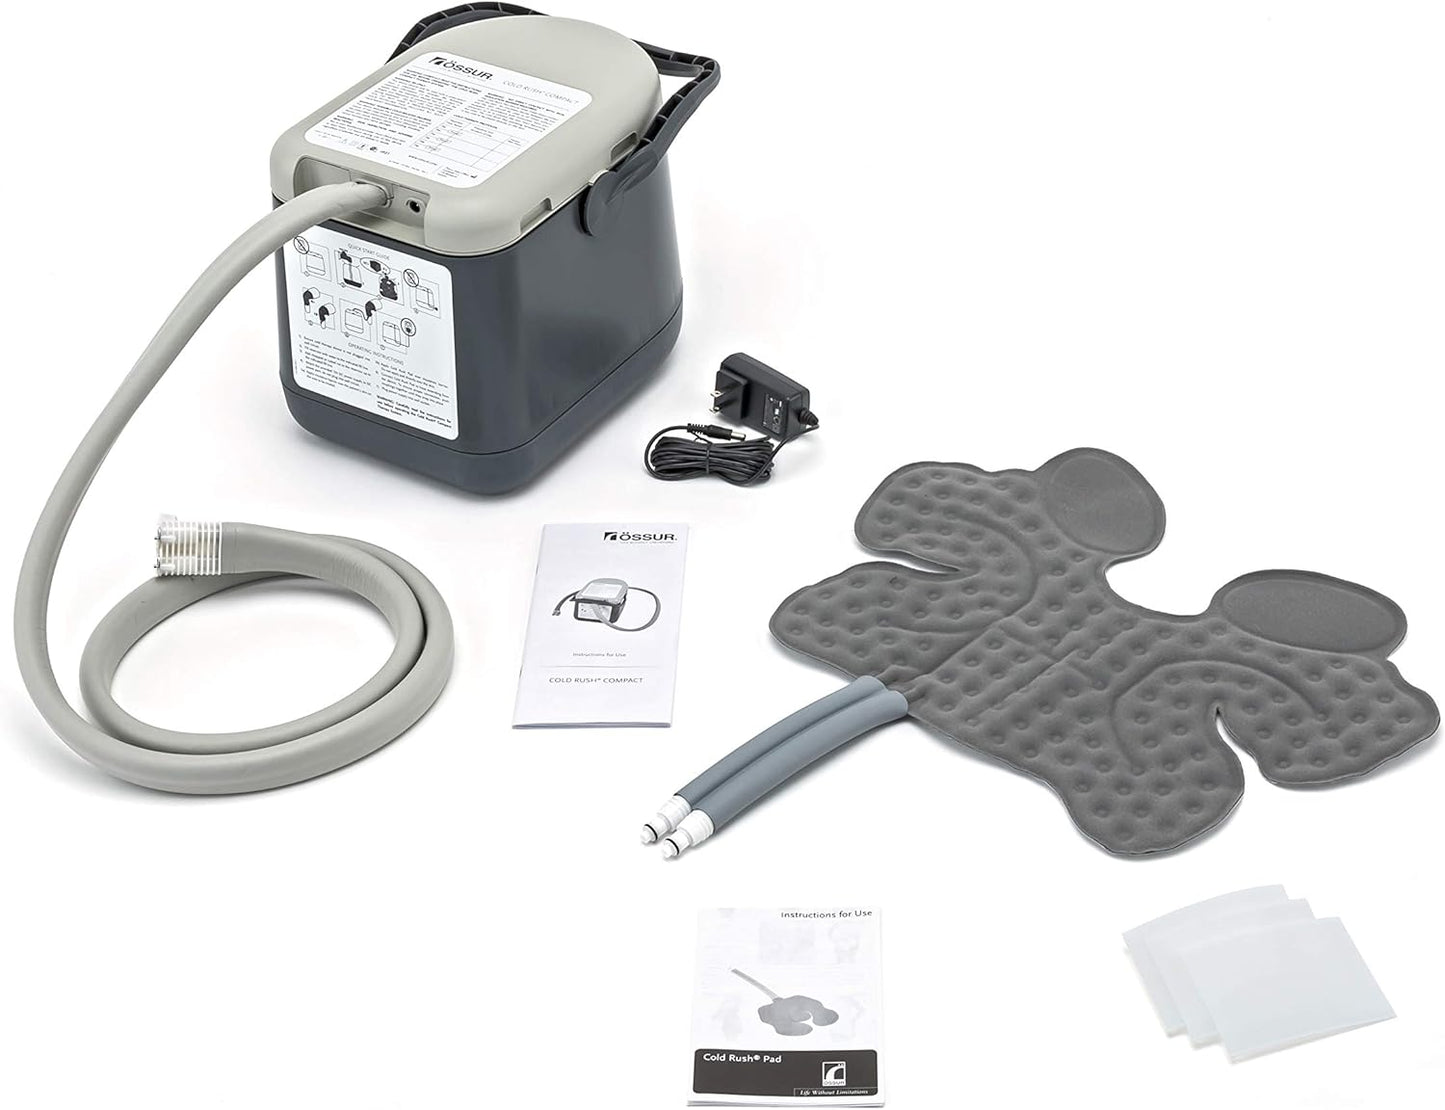 Ossur Cold Rush Compact Cold Therapy Machine System and Pads